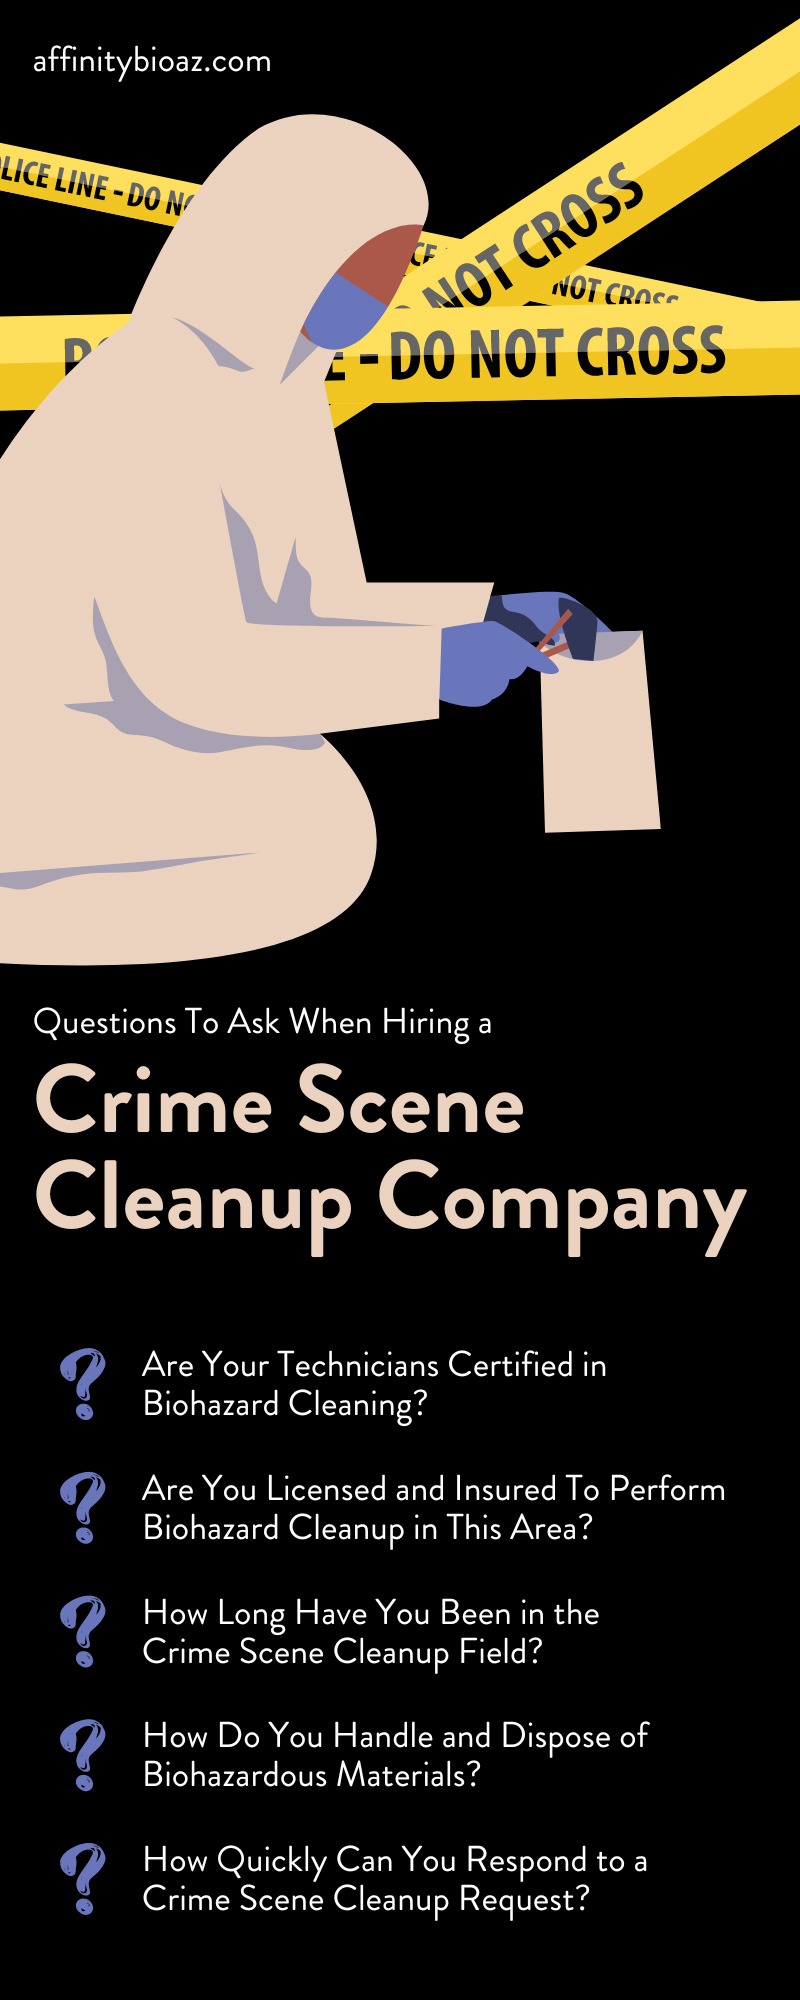 9 Questions To Ask When Hiring a Crime Scene Cleanup Company